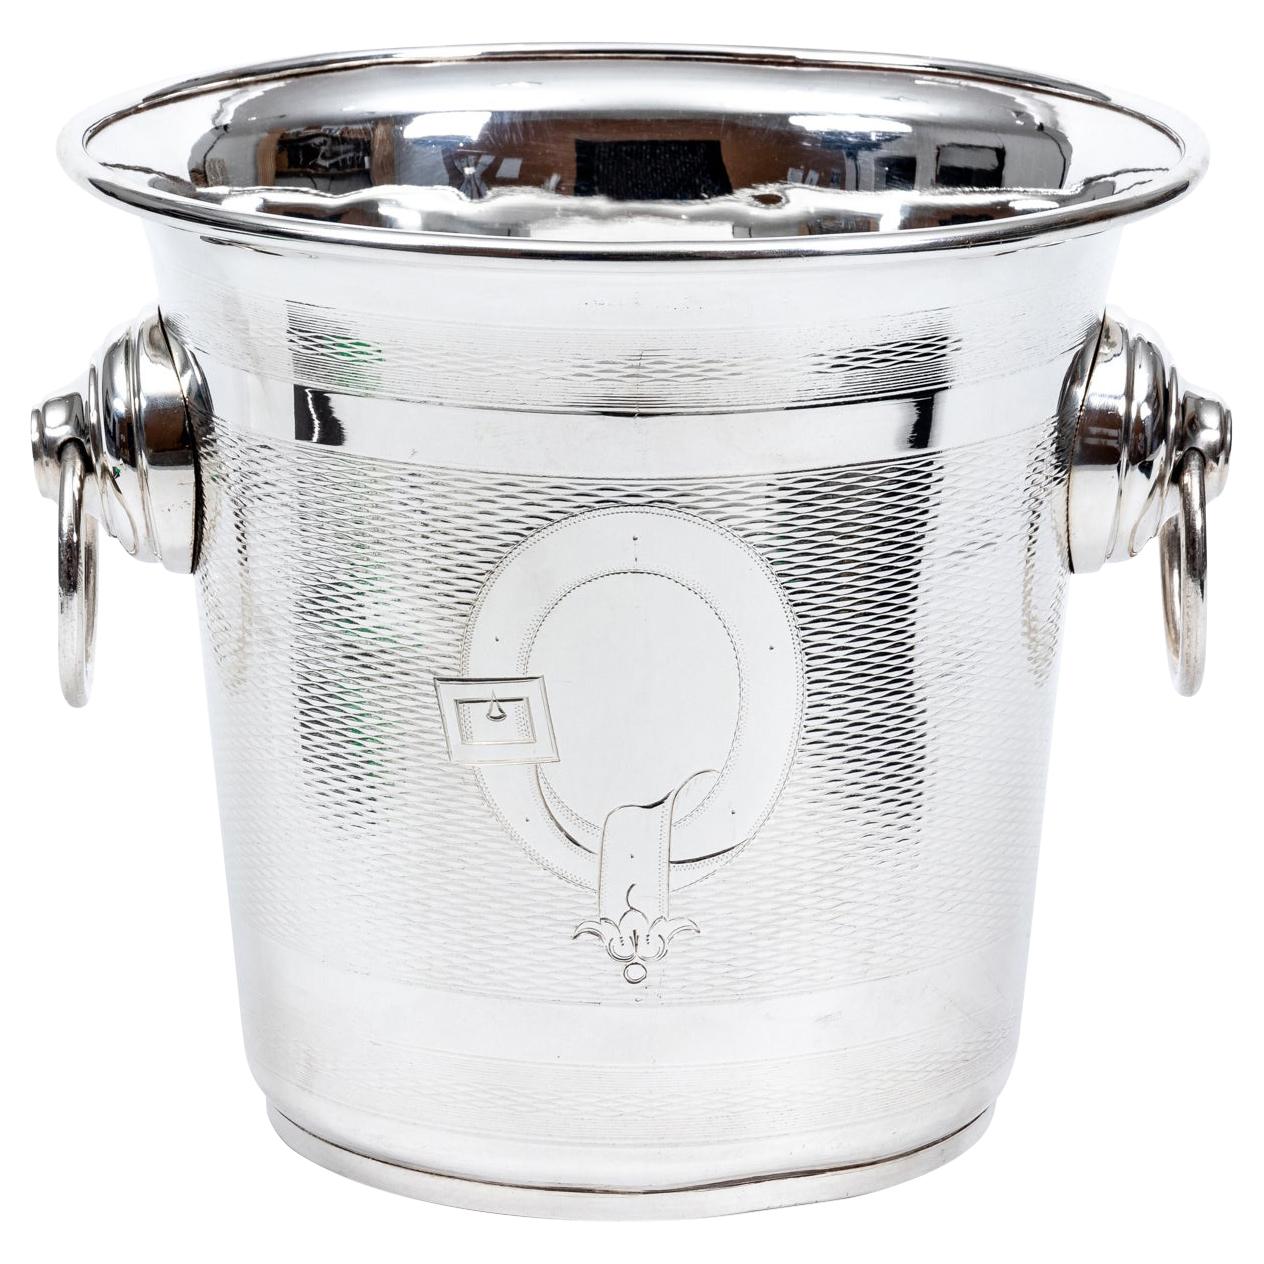 Champagne Bucket or Wine Cooler